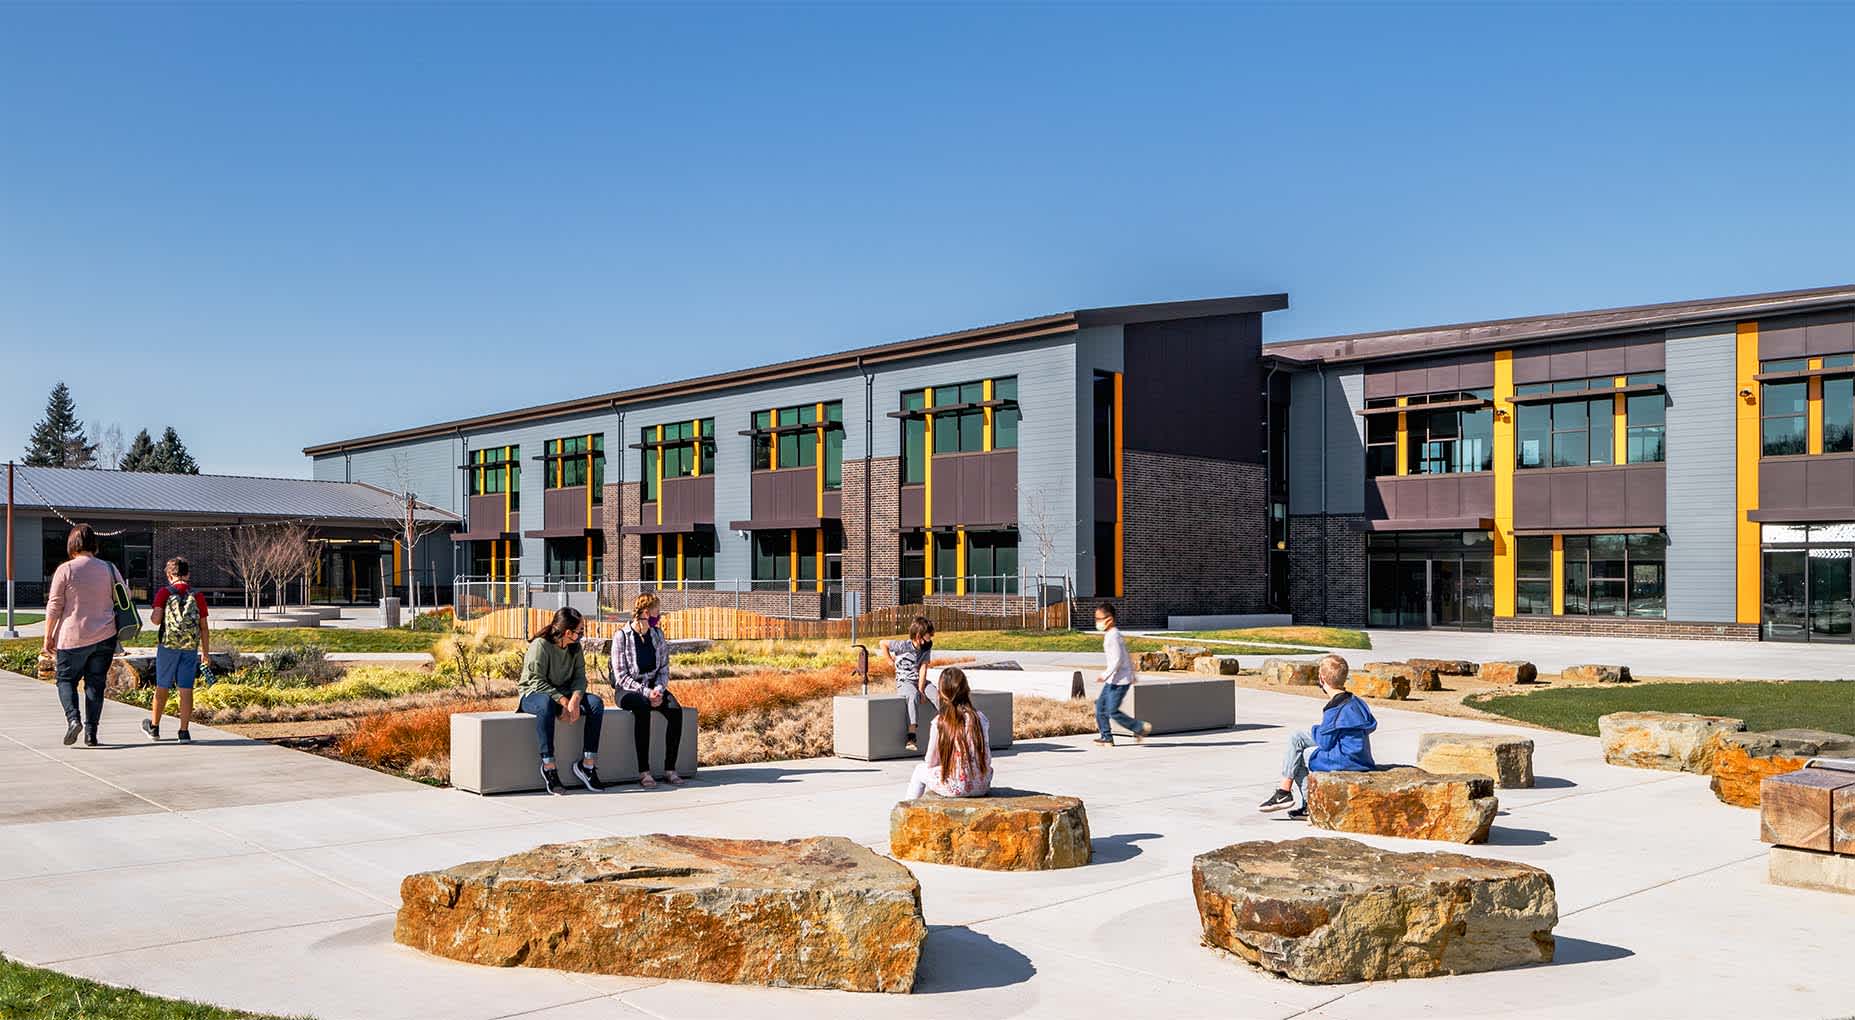 LSW Architects designed the exterior of Martin Luther King Jr. Elementary School to 